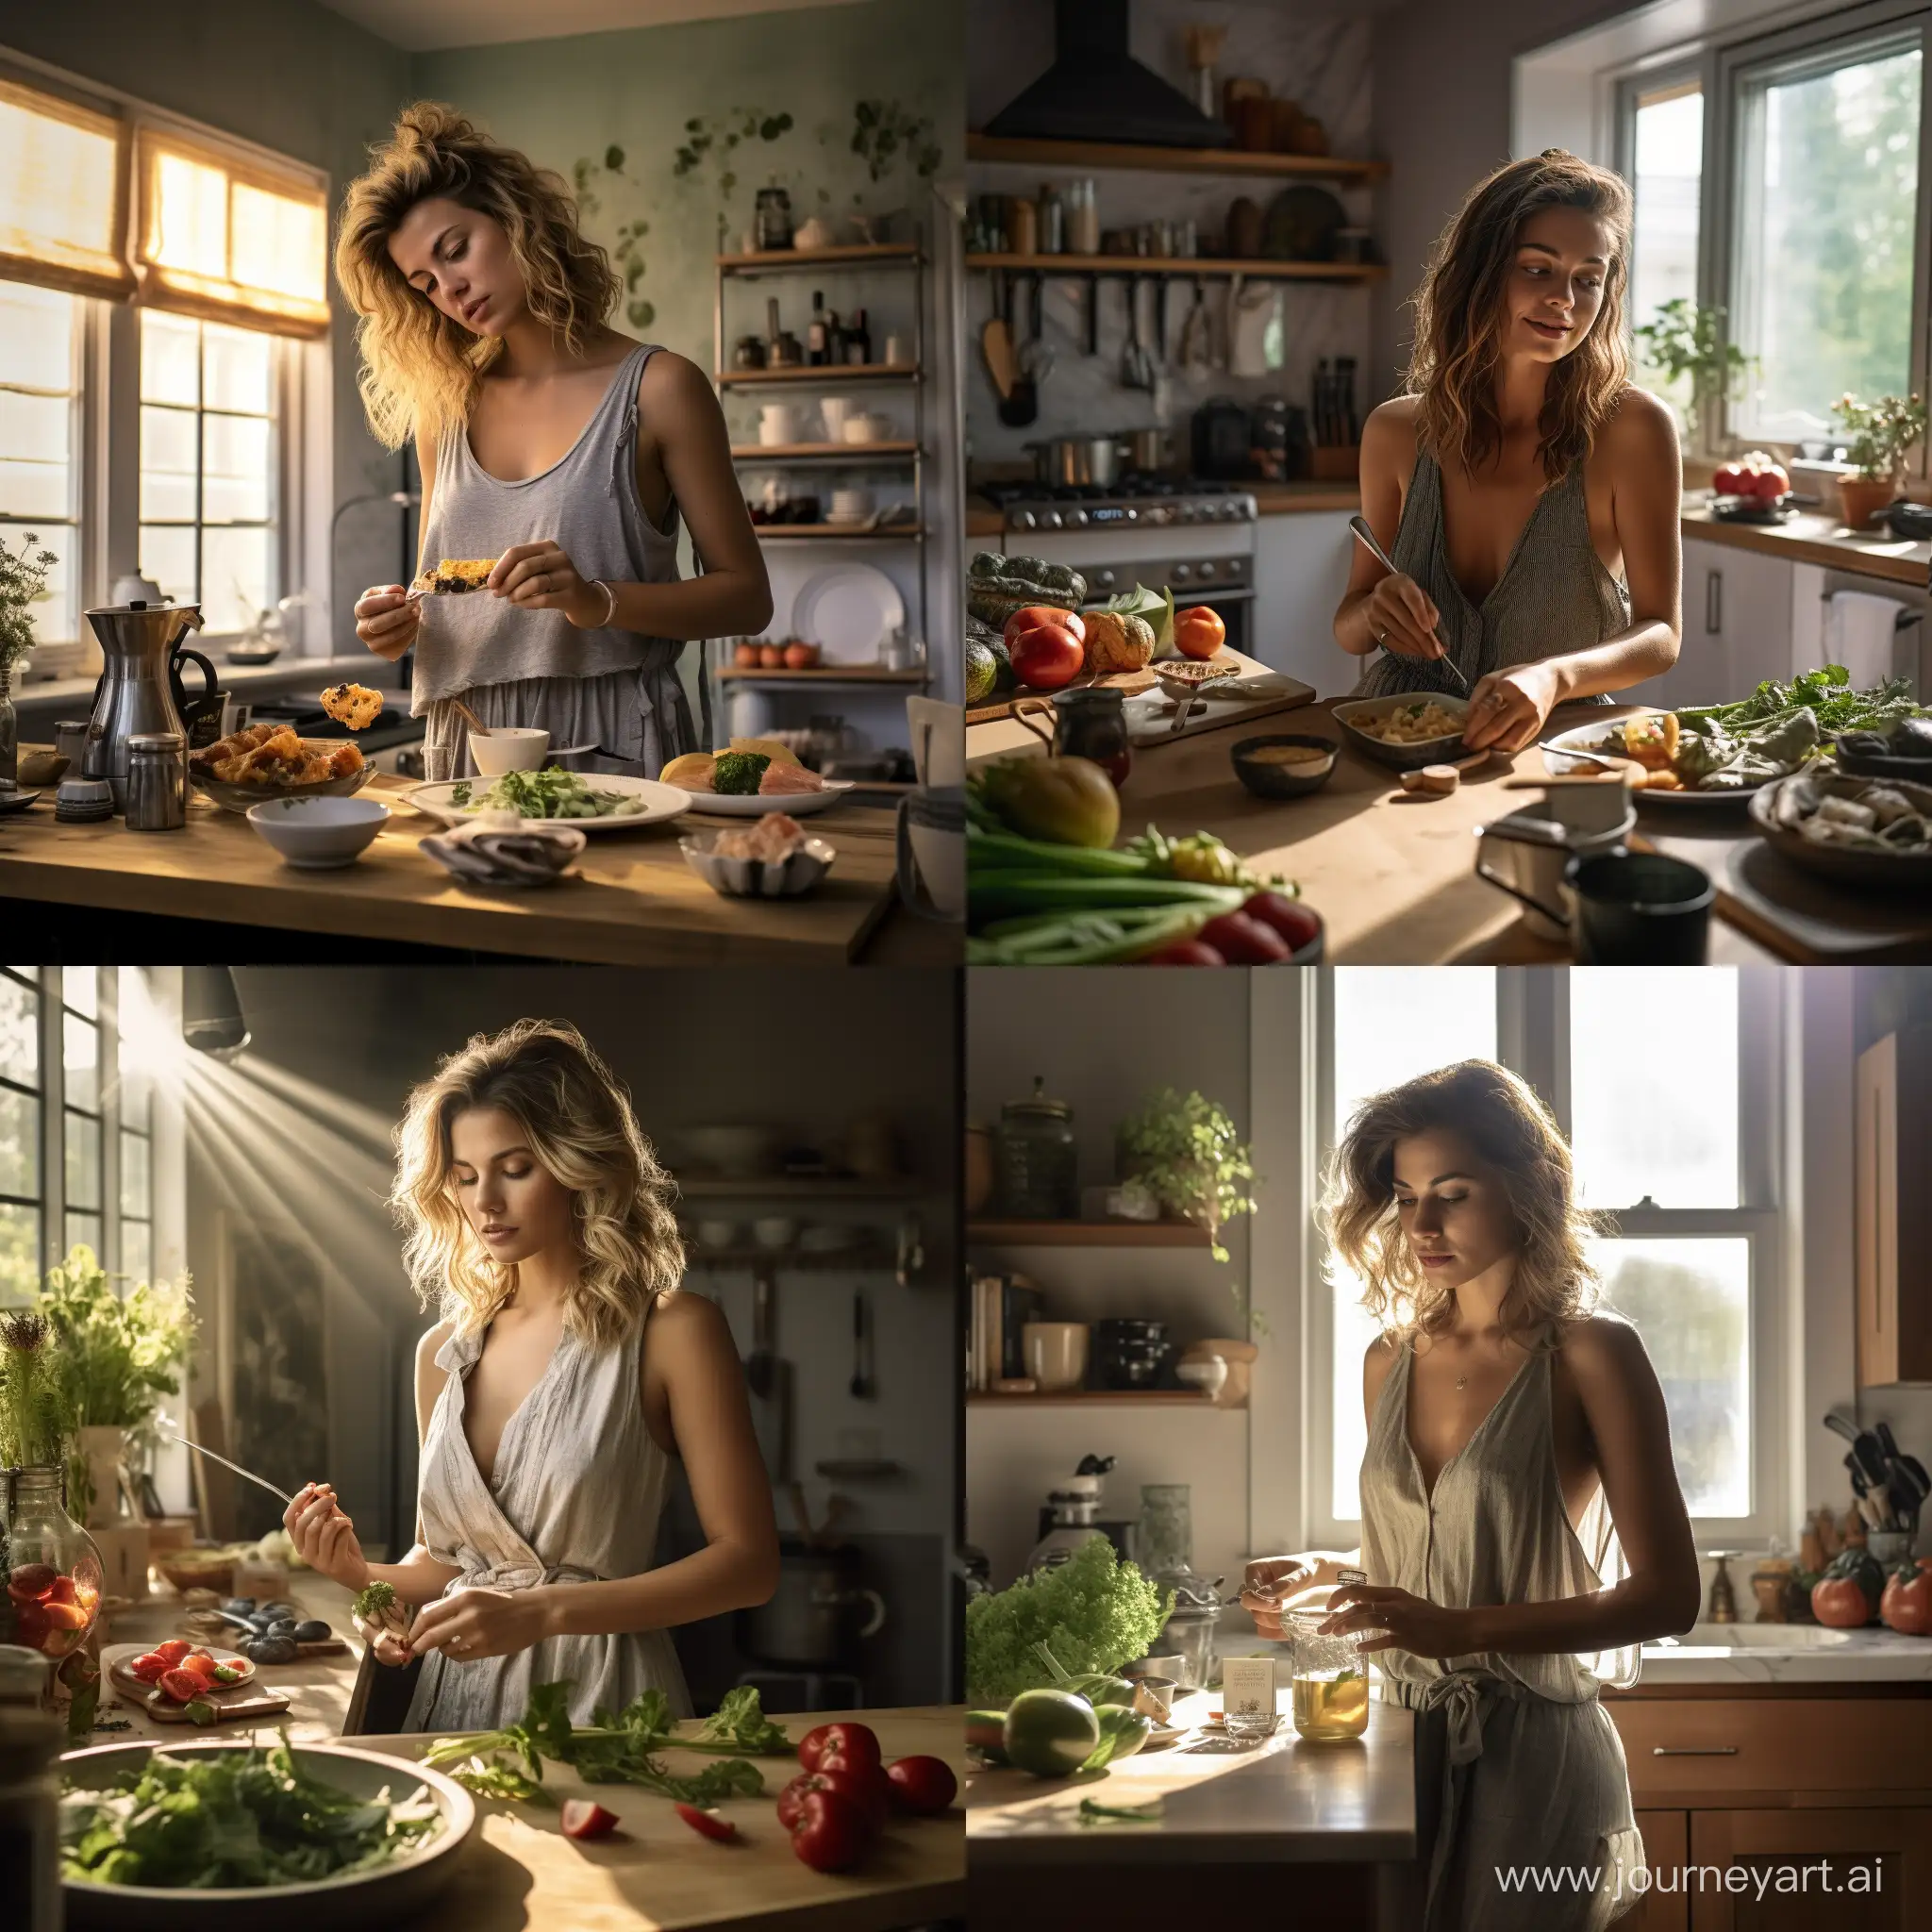 Homemade-Breakfast-Preparation-Hyper-Realistic-FullBody-Woman-with-Sony-Alpha-A9-II-and-FE-200600mm-Lens